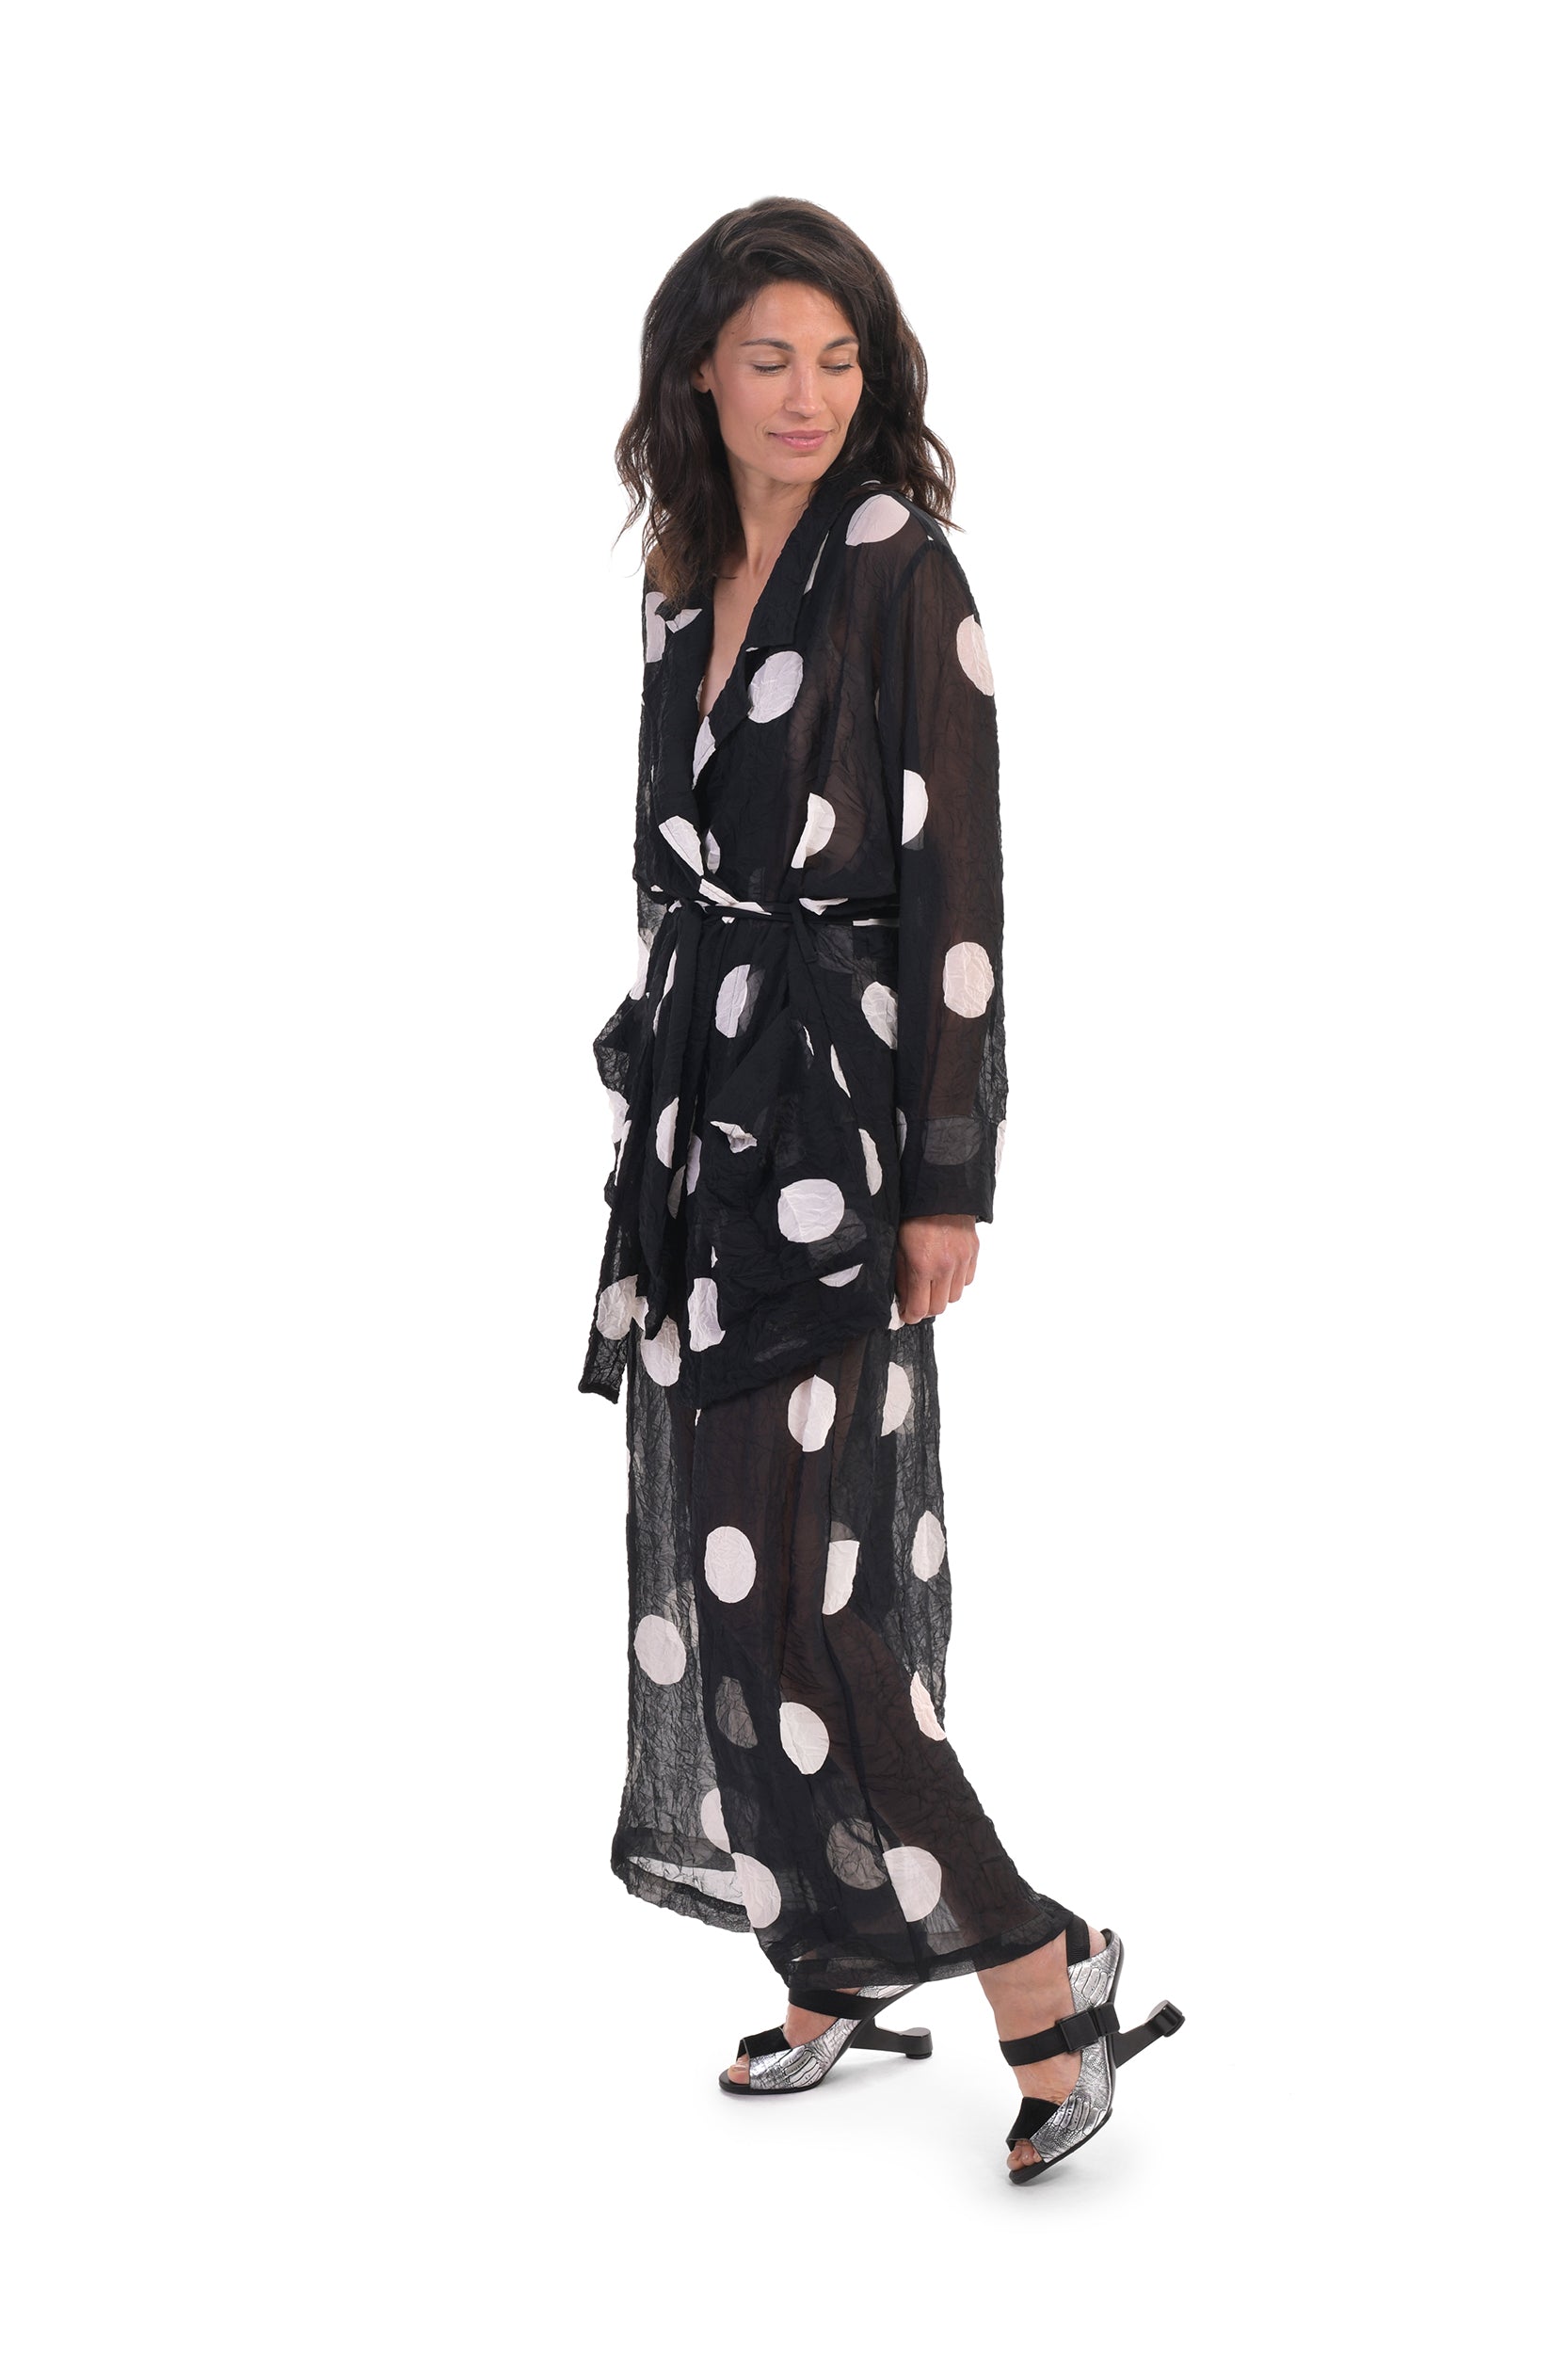 Left side full body view of a woman wearing the alembika chiffon dot palazzo pant with a matching chiffon shirt. The pant and shirt is black with white dots. The fabric appears sheer. The pants are wide legged and end right above the ankles.